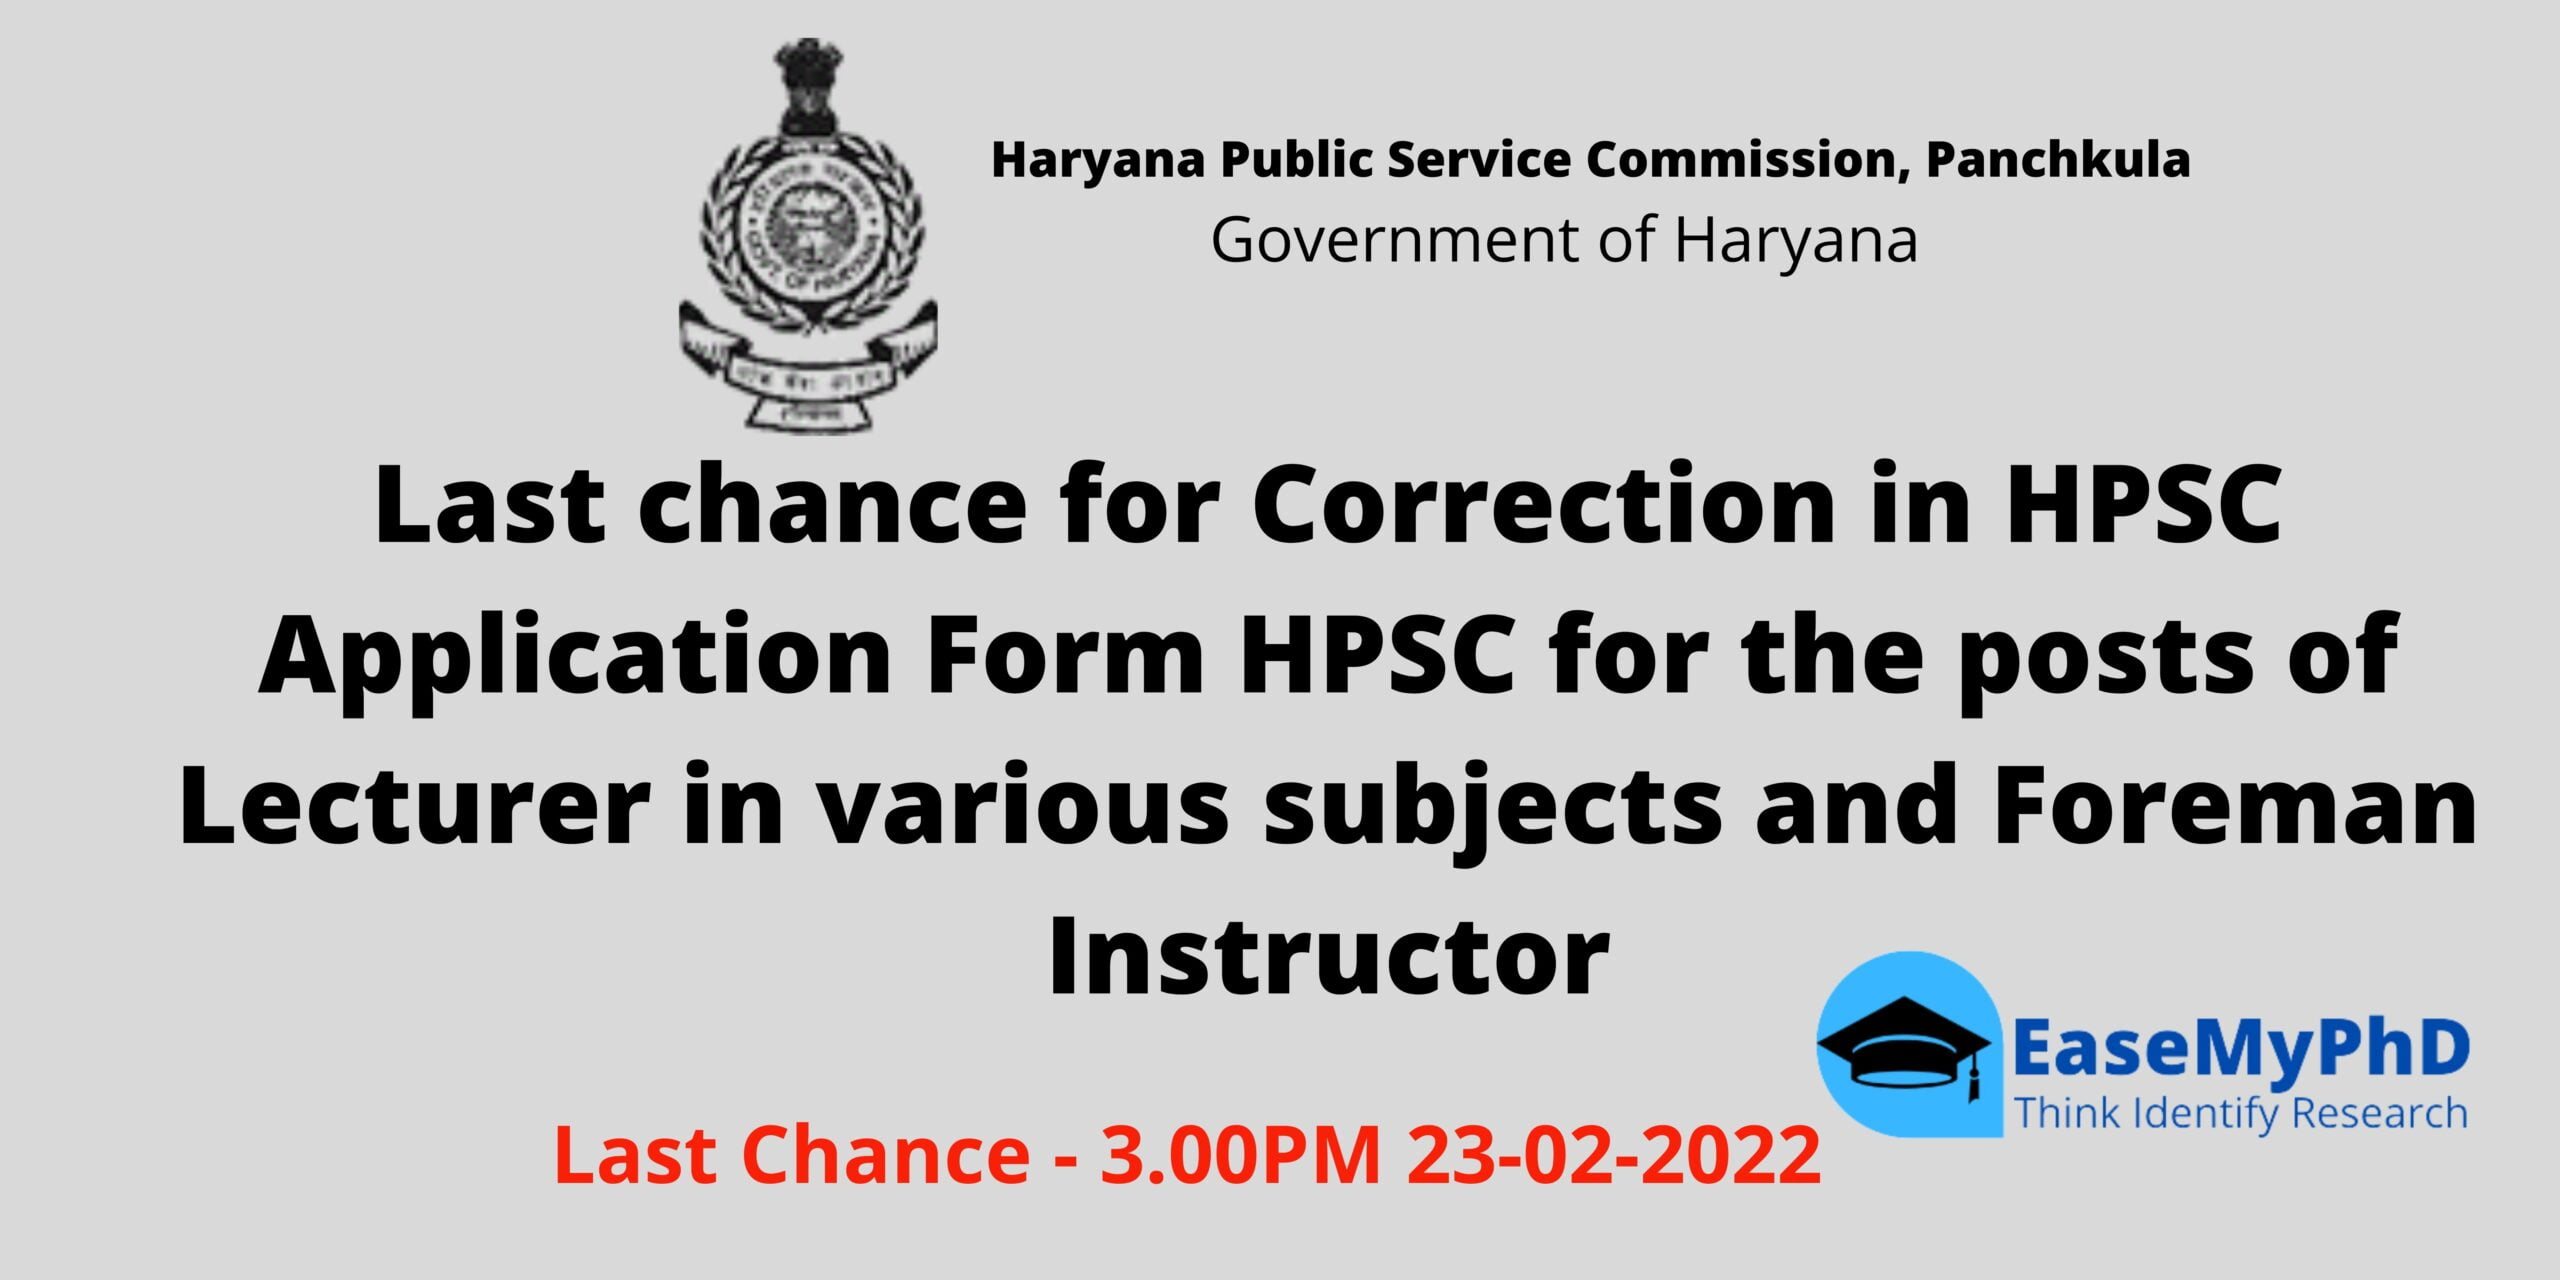 HPSC Announcement For Correction in educational data of Registered applicant